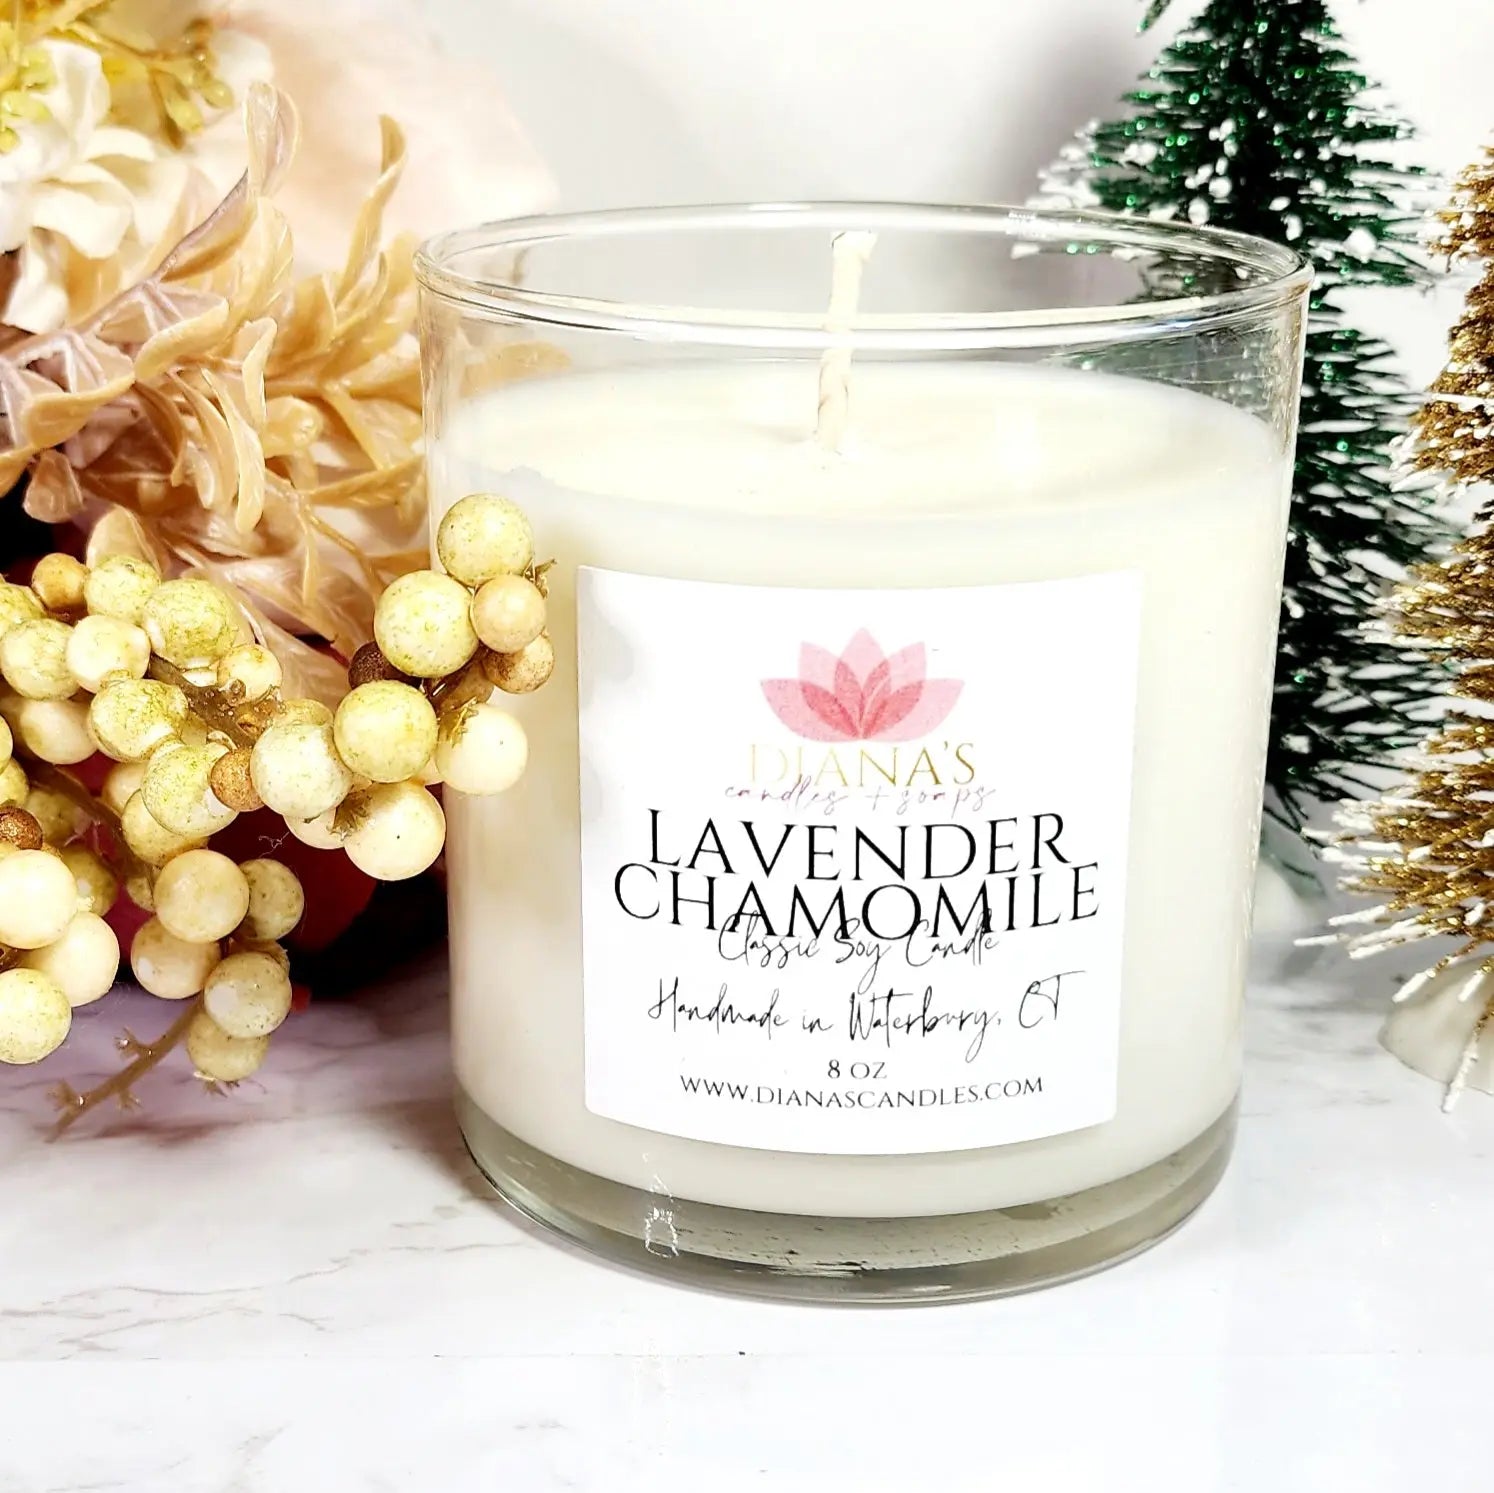 Lavender & Chamomile Jar Candle - Diana's Candles and Soaps 